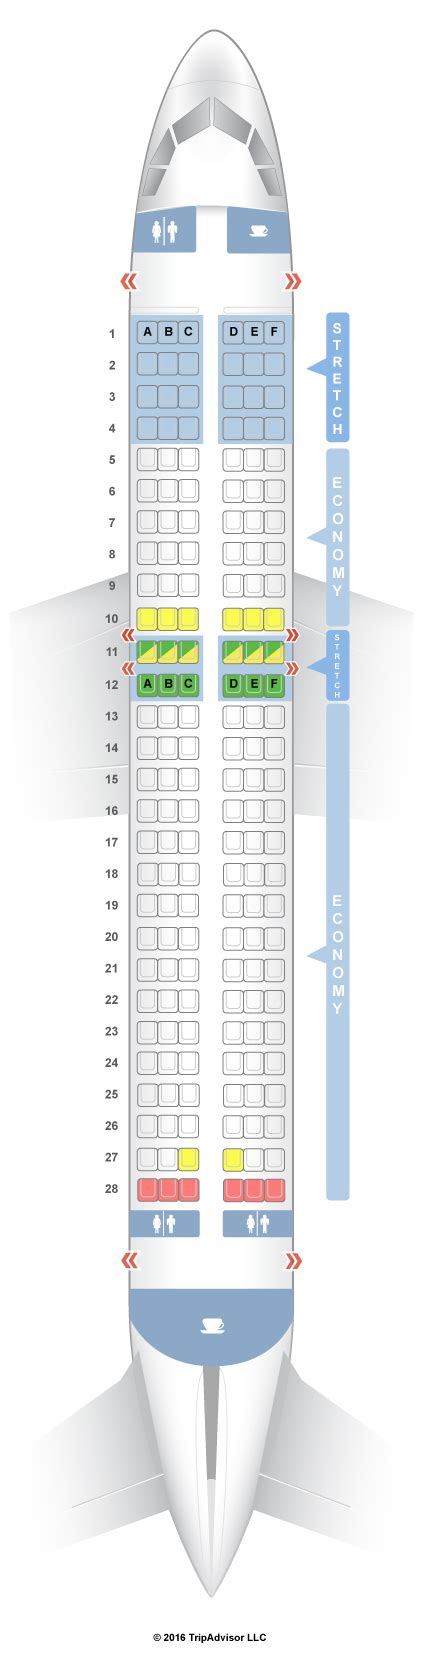 The Standard Frontier Airlines seat selection features seats that